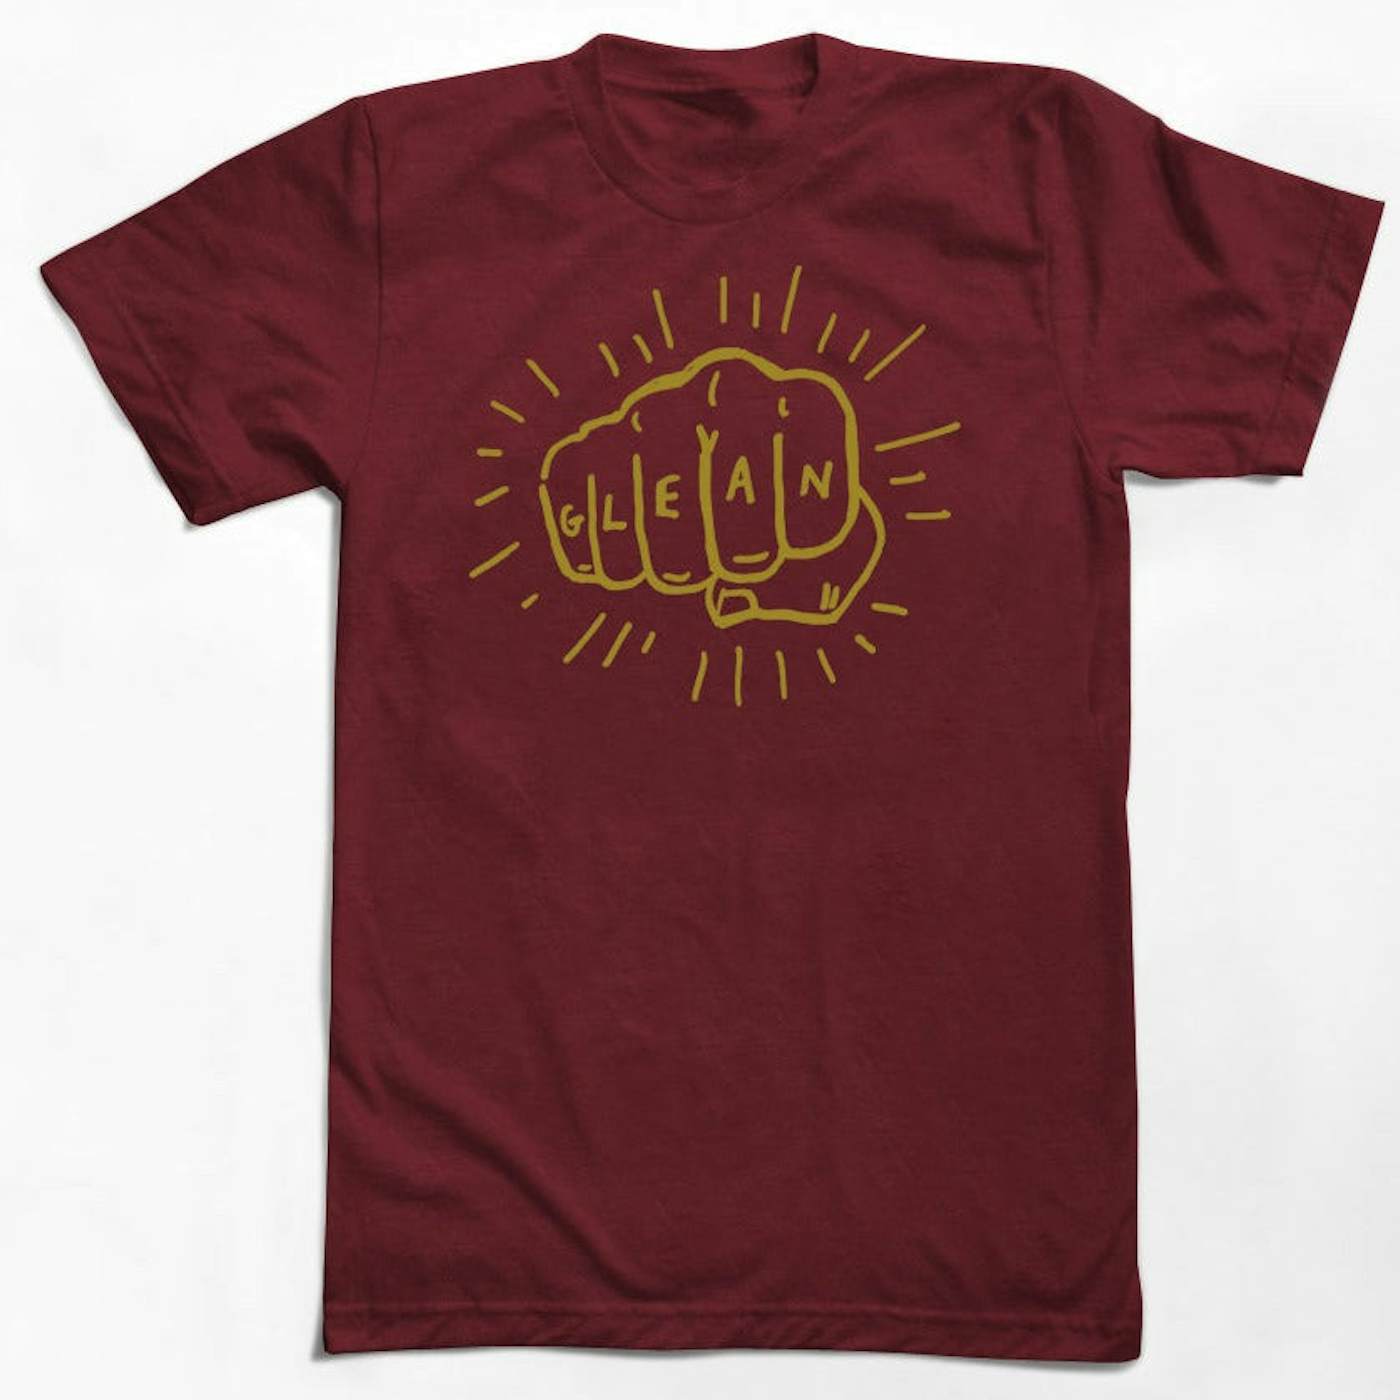 They Might Be Giants Glean T-Shirt (Unisex)